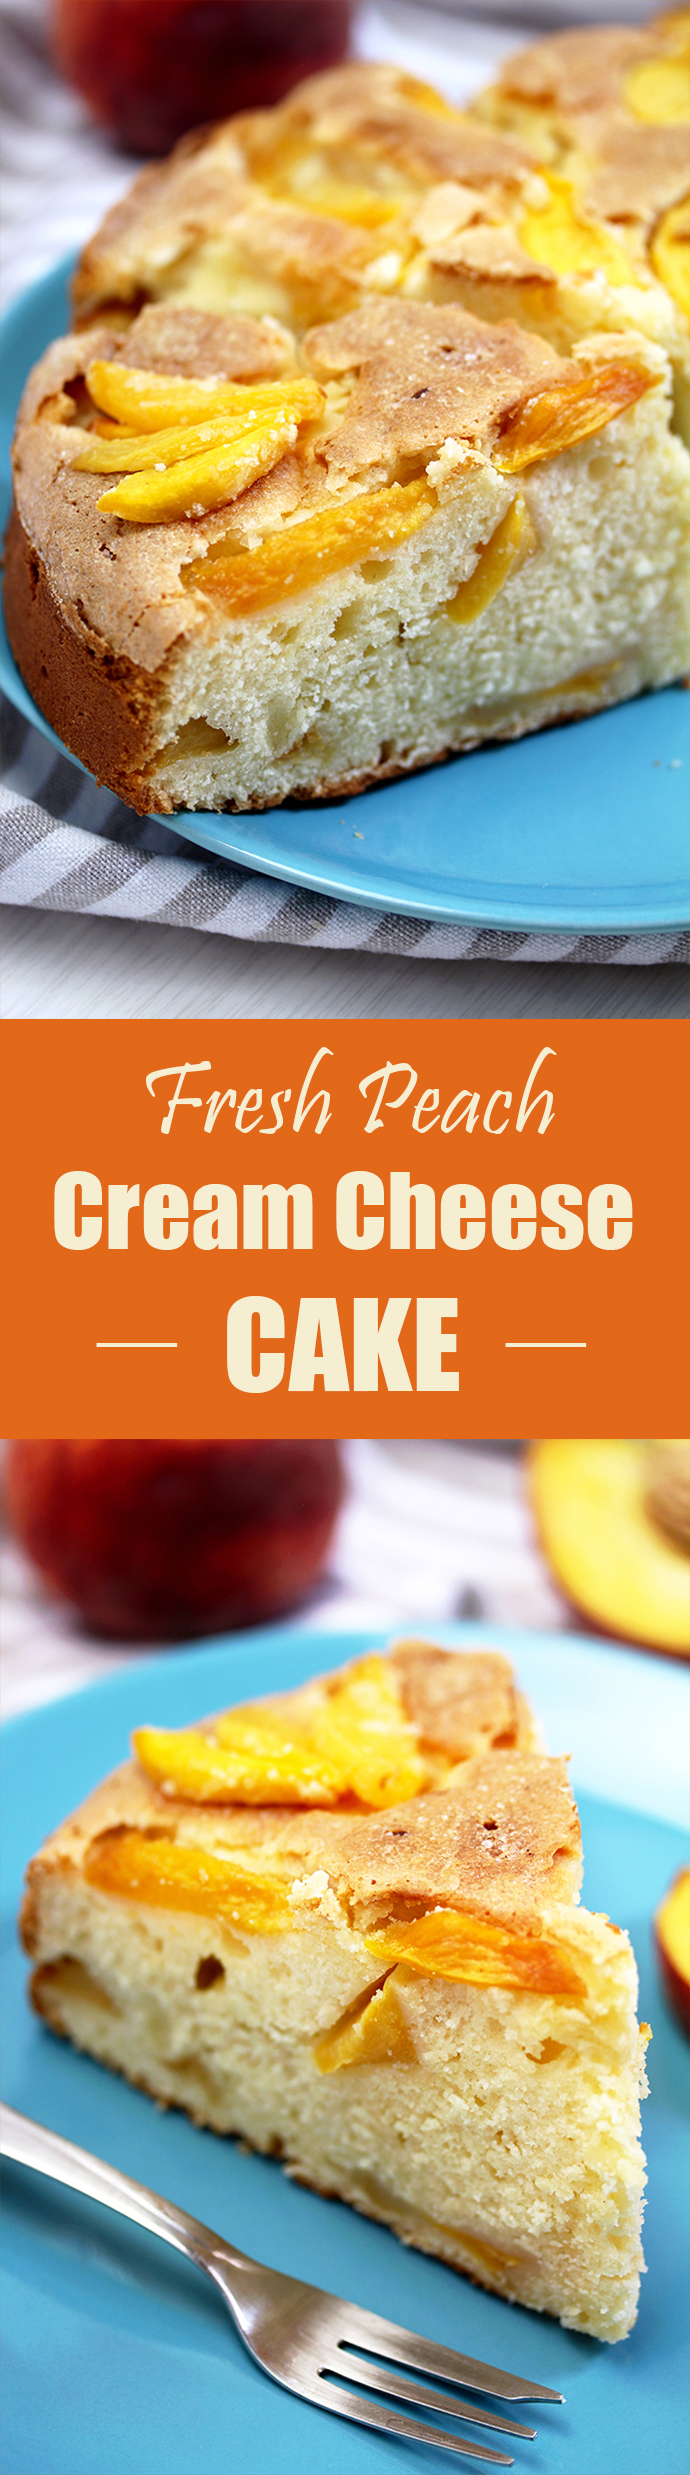 Fresh Peach Cream Cheese Cake is light and simple summer cake that is easy to make and is eaten quickly. Cream cheese and fresh peaches make it so good.